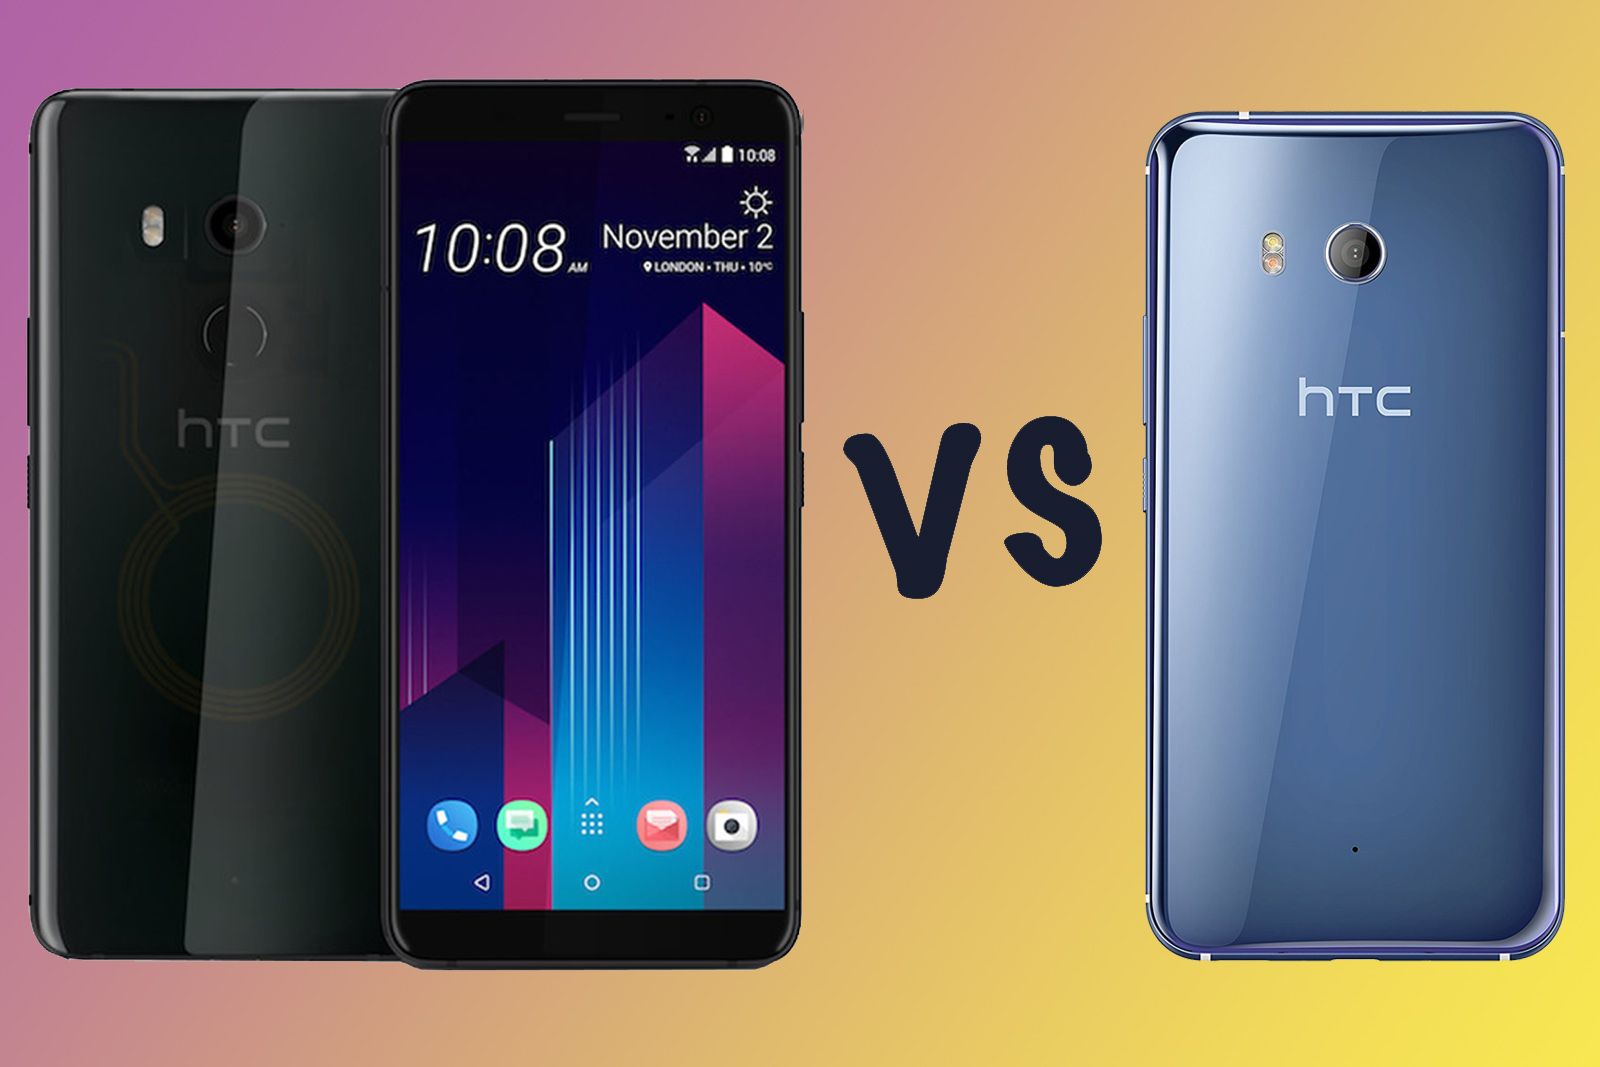 HTC U11 vs HTC U11 Whats the difference image 1